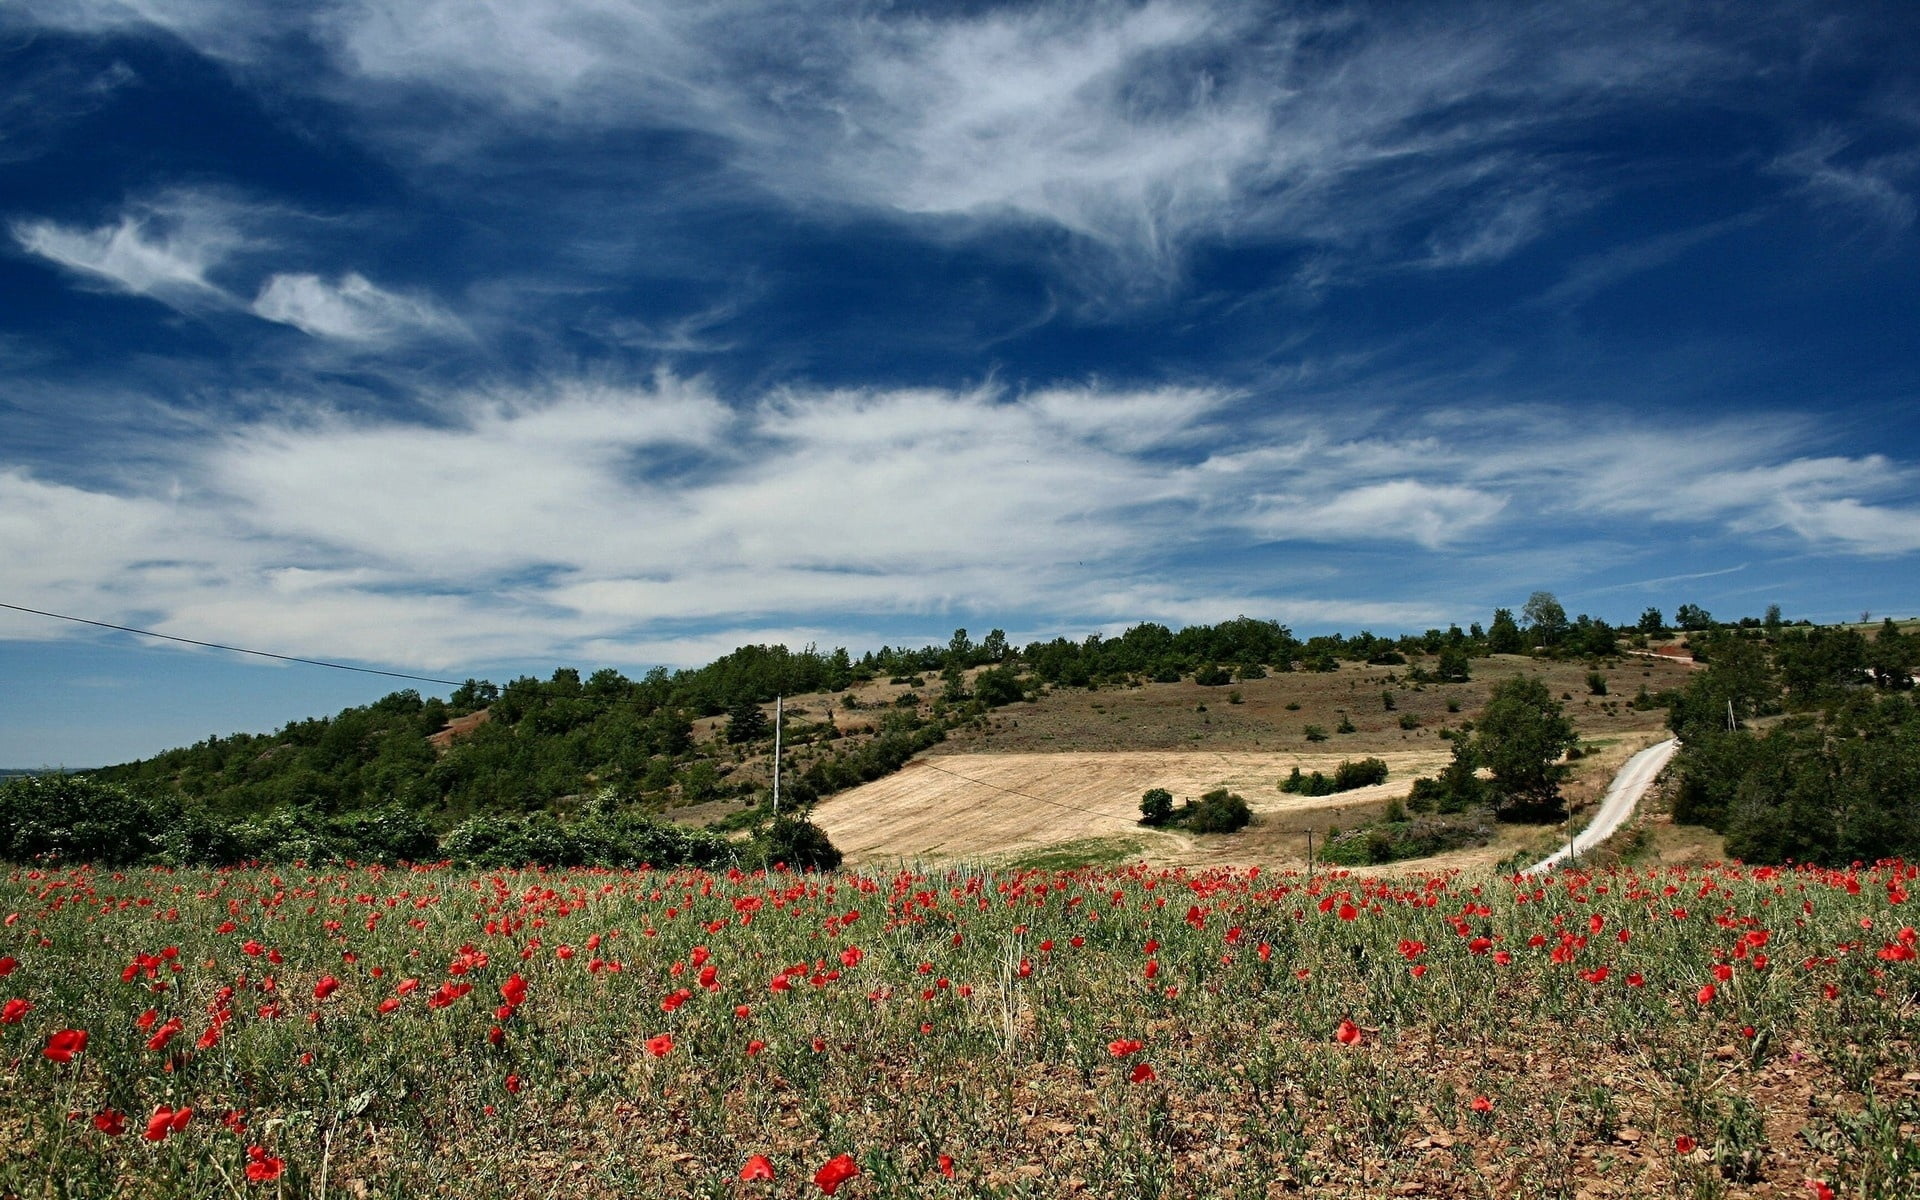 red petaled flowers, sky, field, clouds, lungs, poppies, clearly